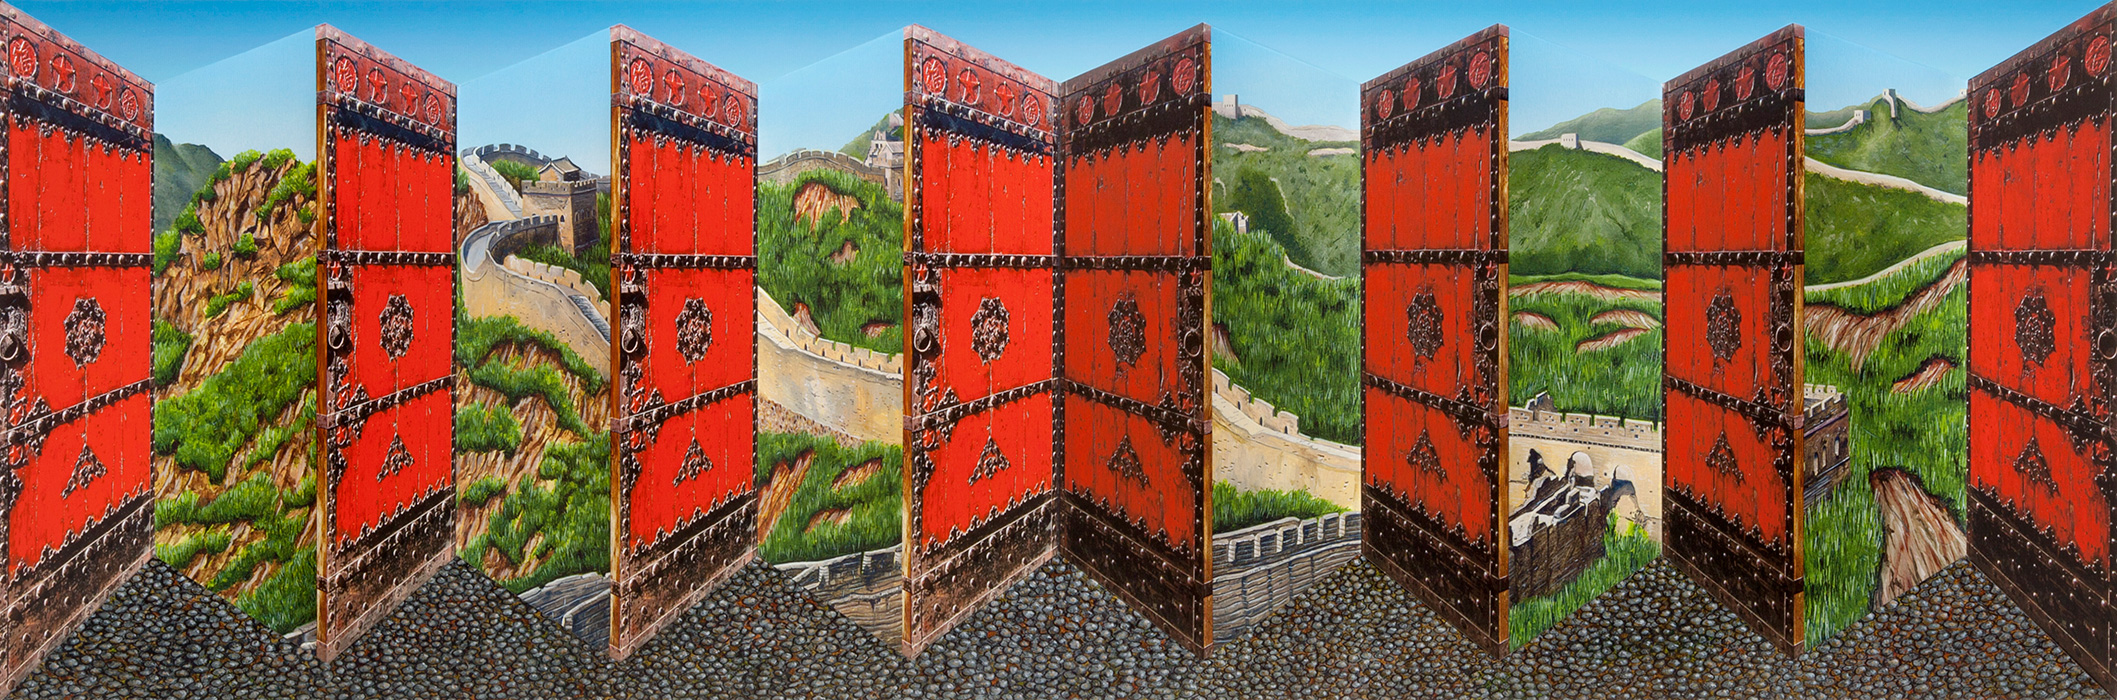 Great Wall <p>2016 | Edition 50 | 46 x 113 x 16 cm / 18¼ x 44½ x 6¼ in</p>
